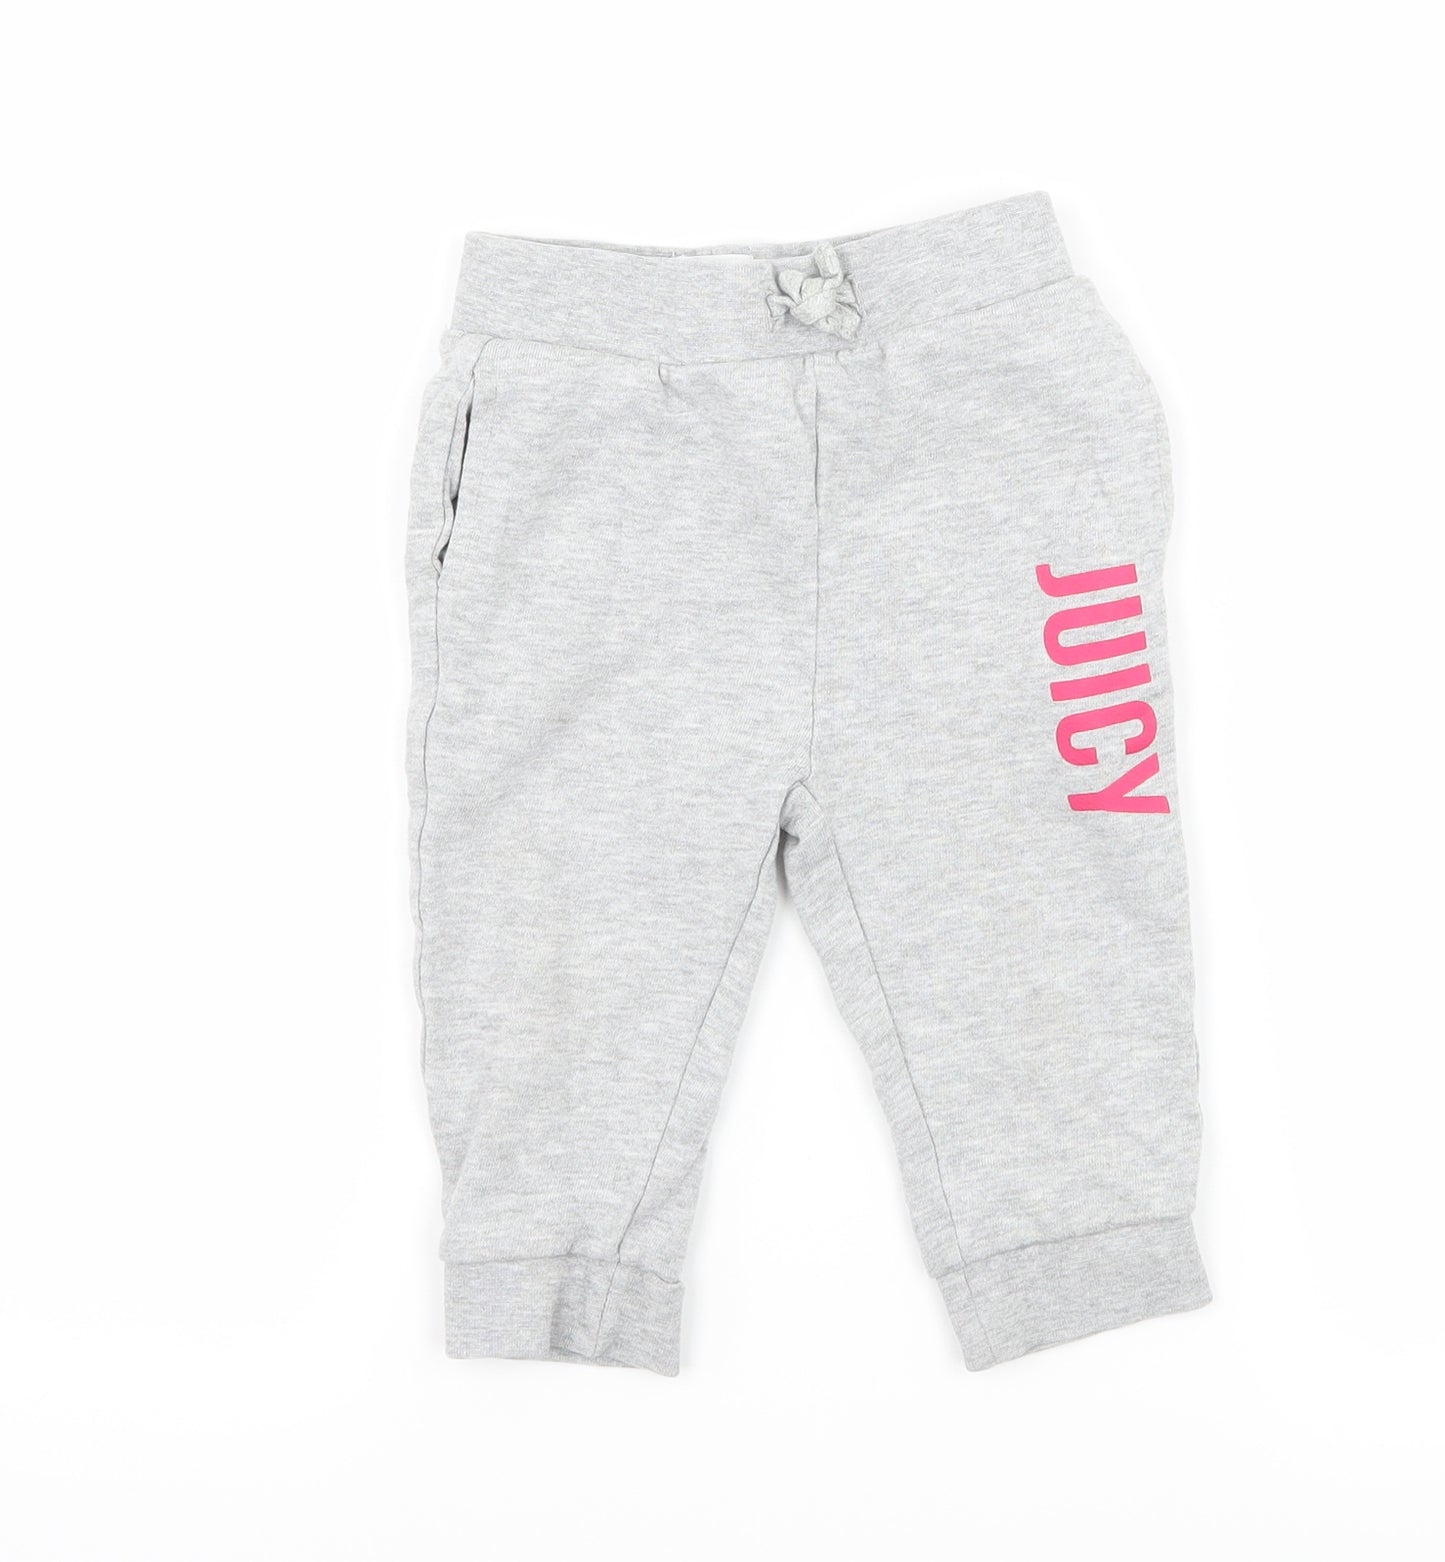 Juicy Couture Girls Grey Geometric Jersey Jogger Trousers Size 12 Months  - Juicy